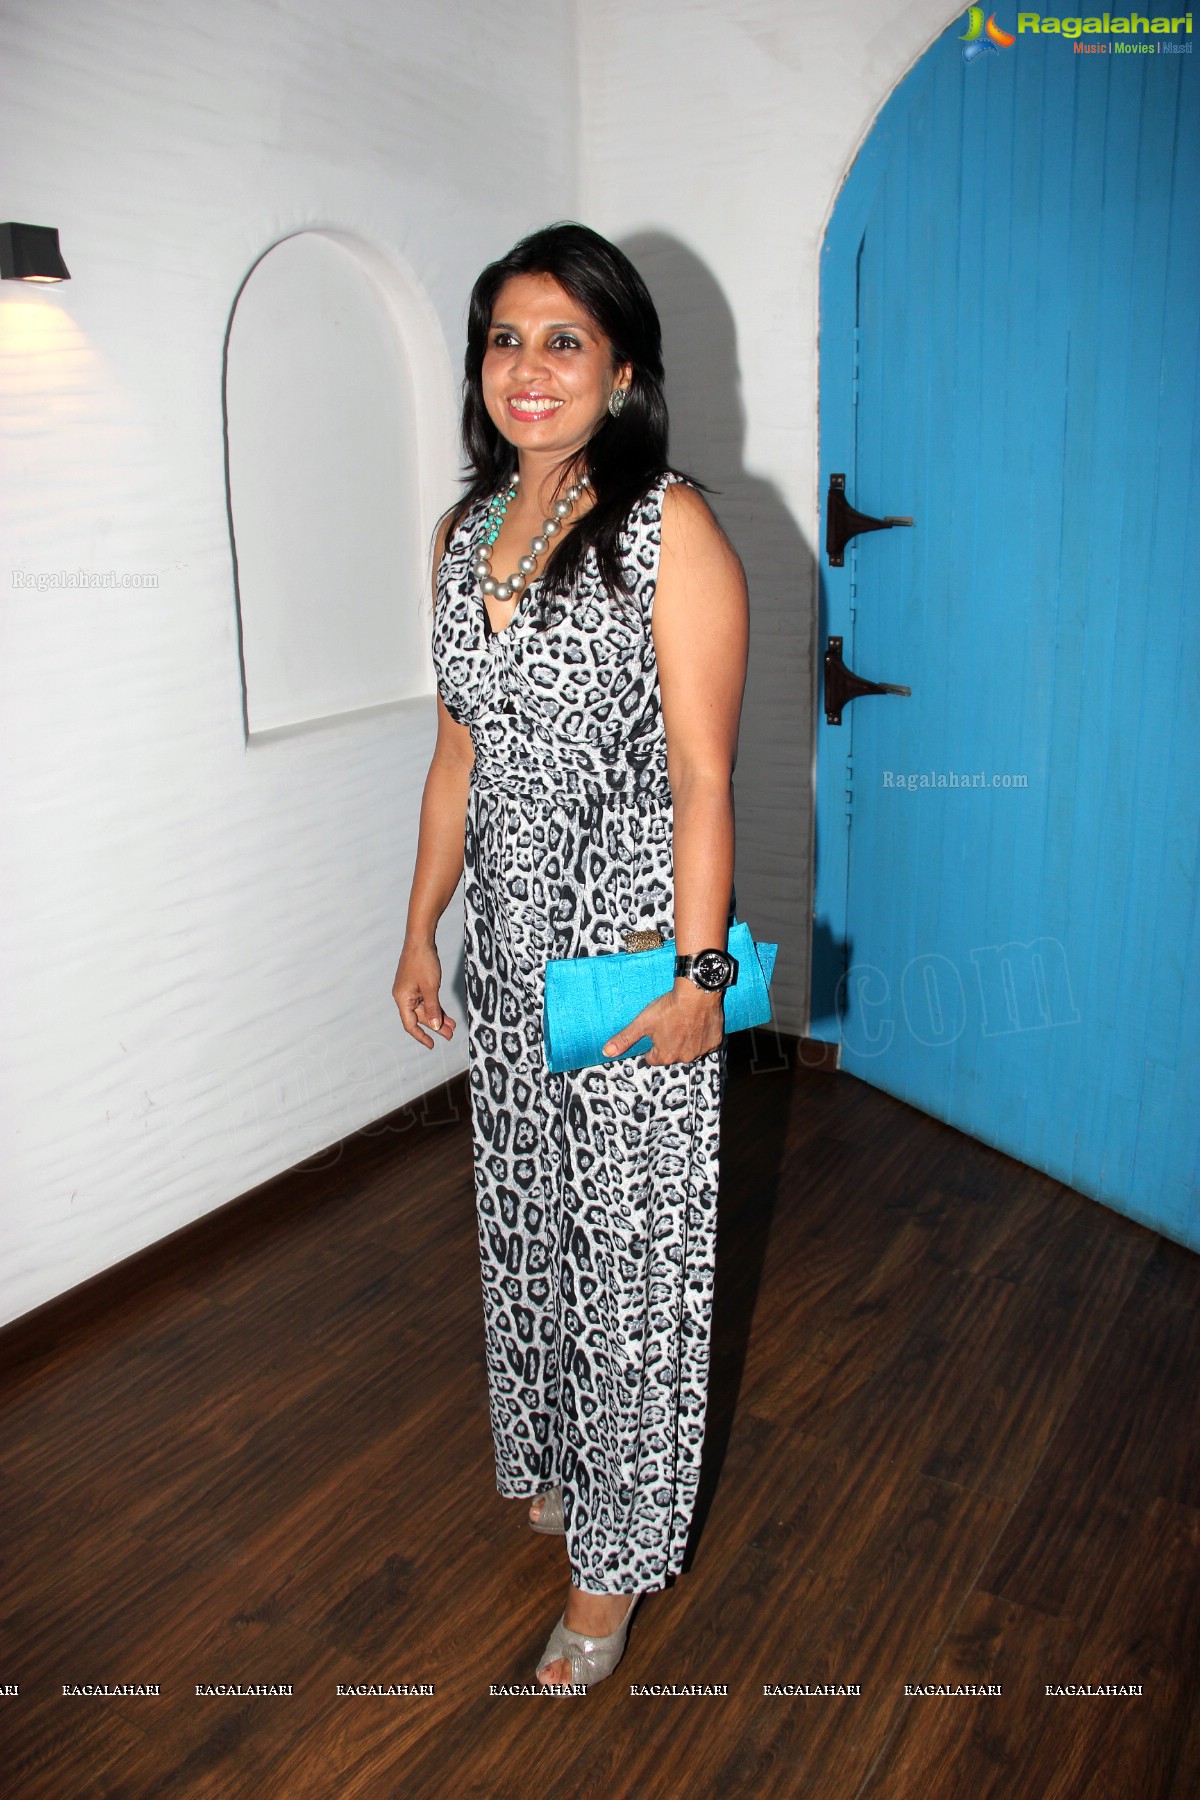 Exclusive Preview of The Blue Door's New Menu by Sula Kishan